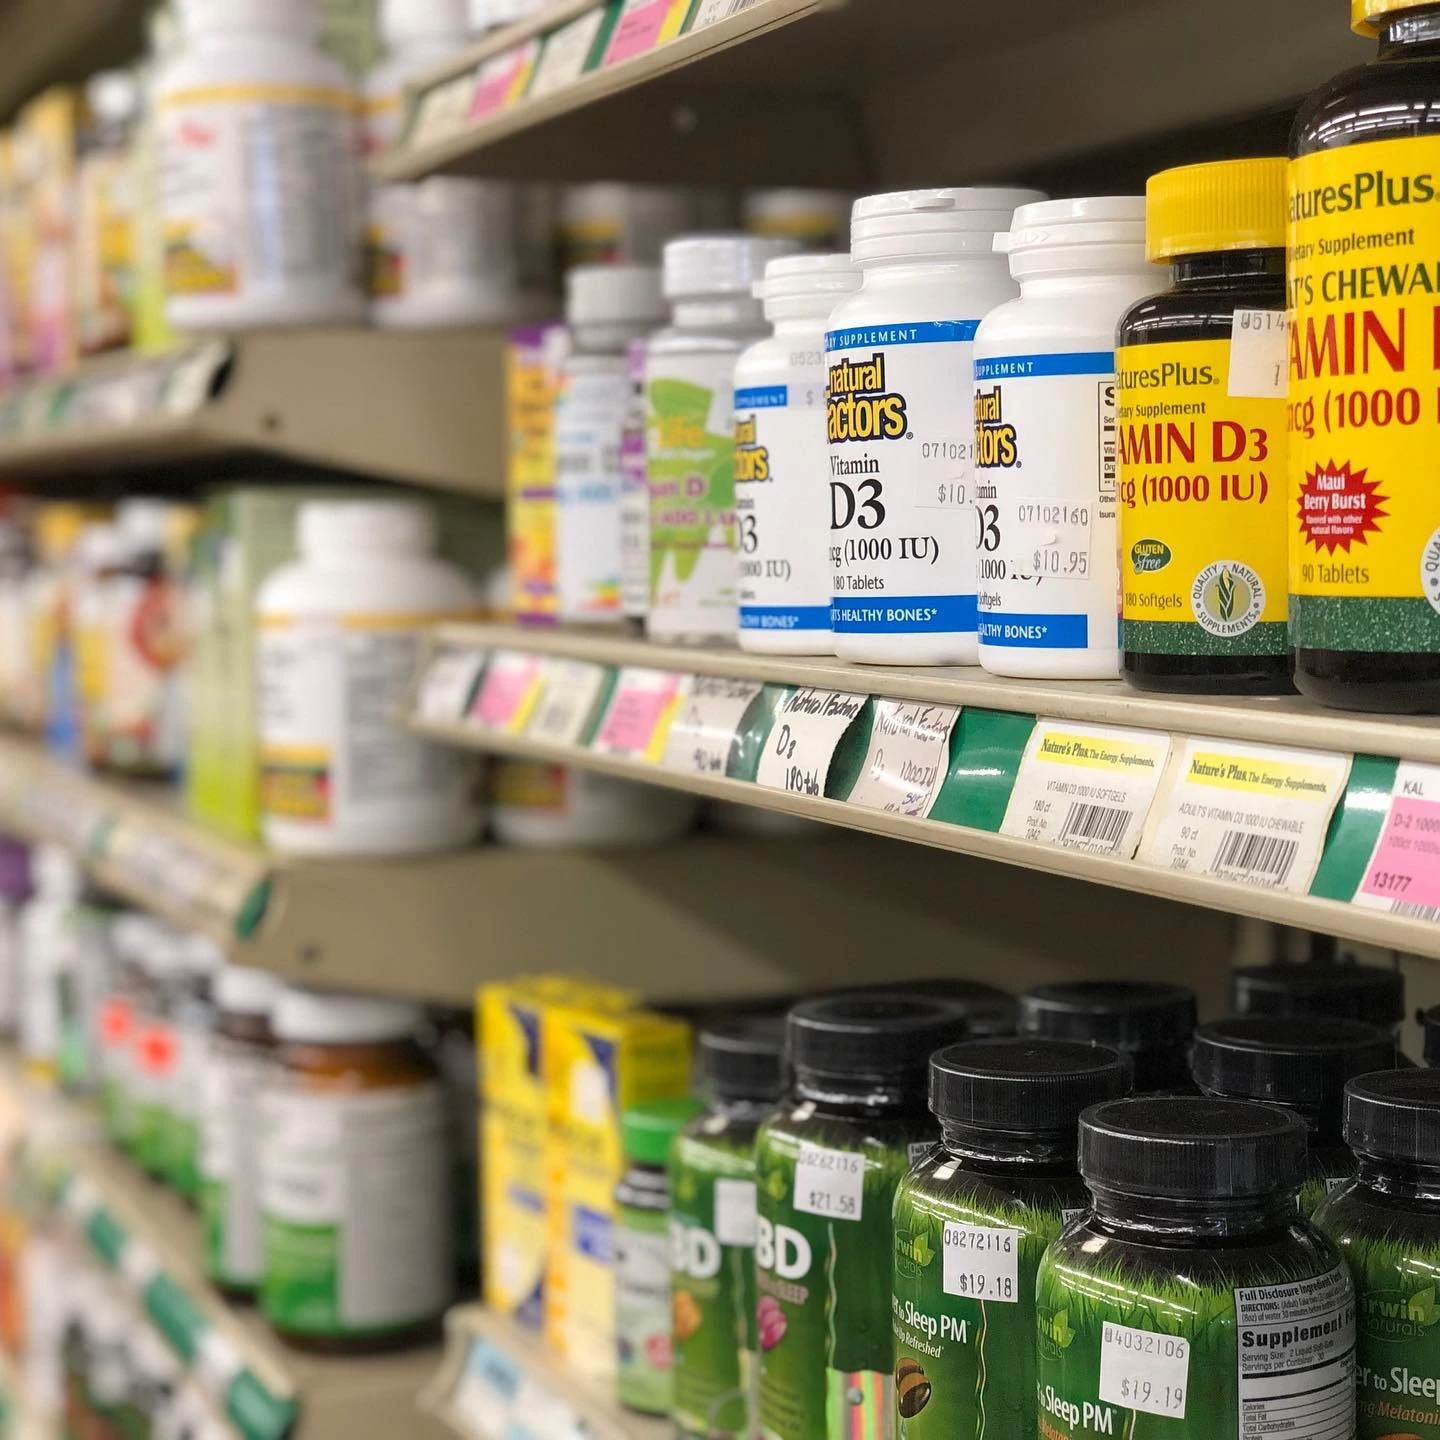 A shelf of vitamins and supplements